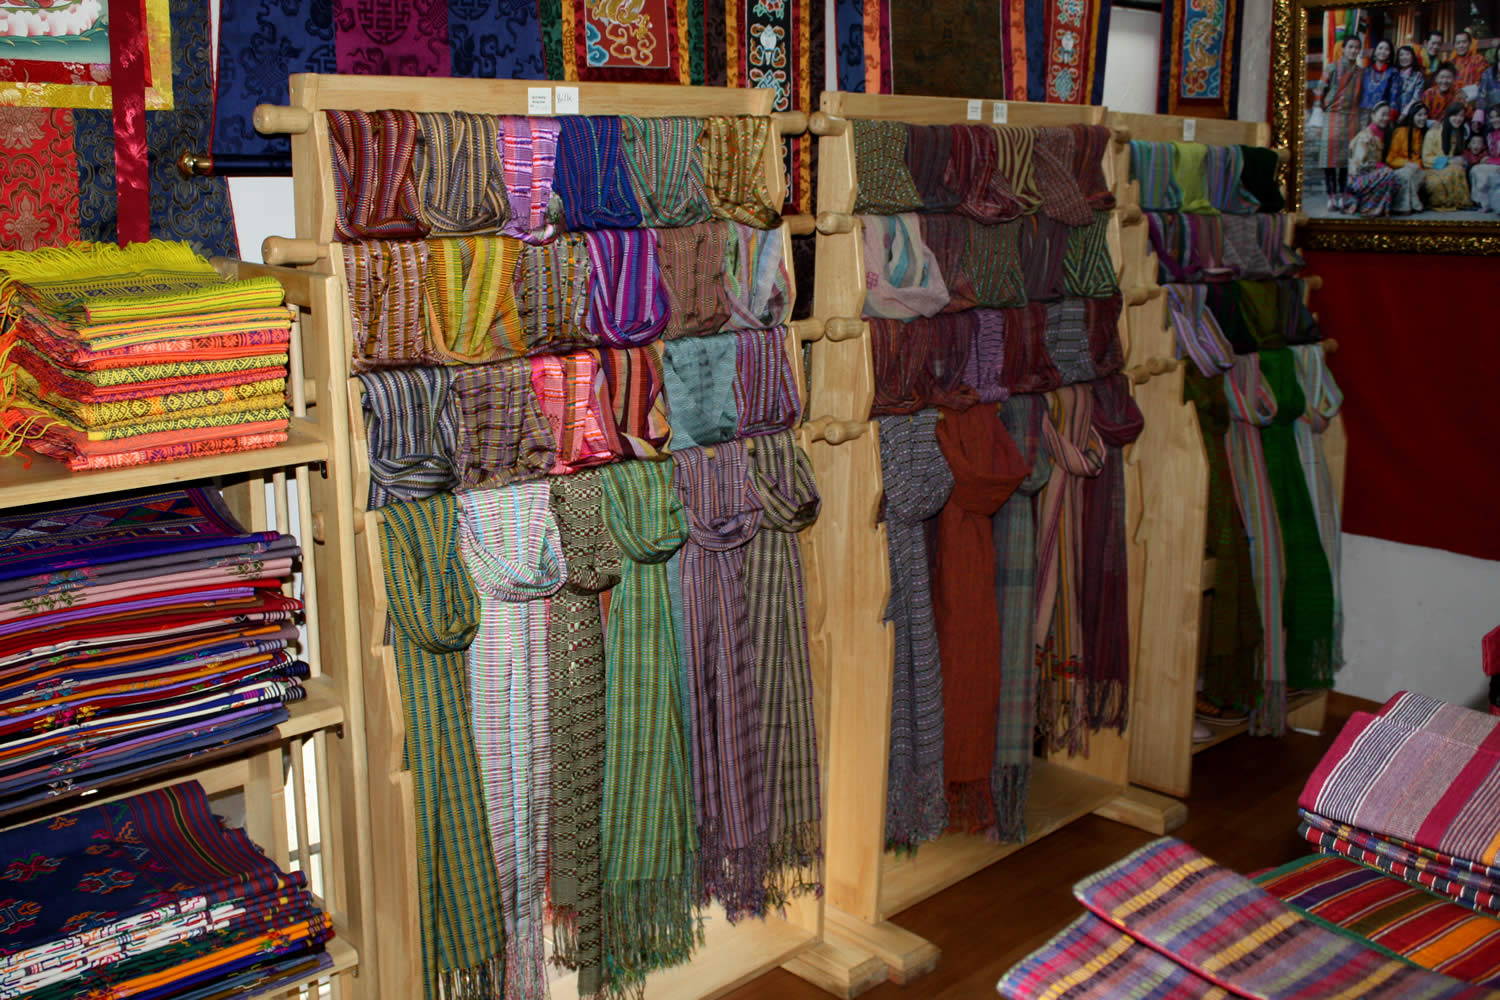 Display of Bhutanese textiles. Weaving is considered one of the 7 great crafts of Bhutan.